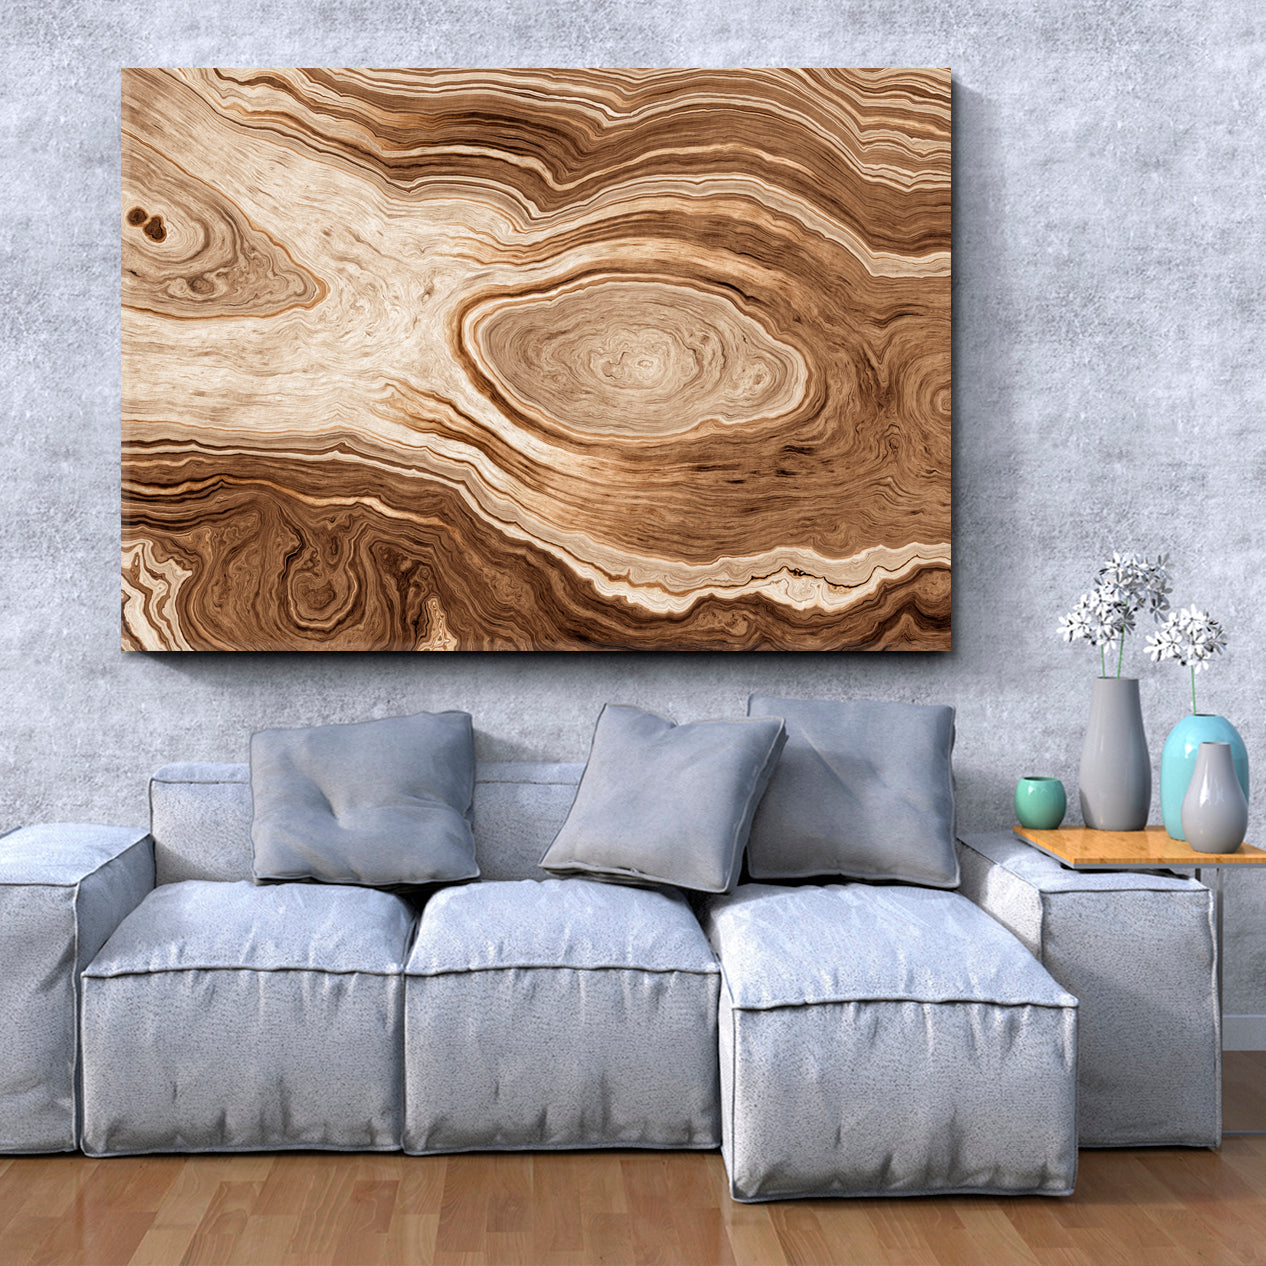 ABSTRACT Wavy Lines Age Growth Rings Oak Big Tree Trunk Slice Cut Woods Abstract Art Print Artesty 1 panel 24" x 16" 